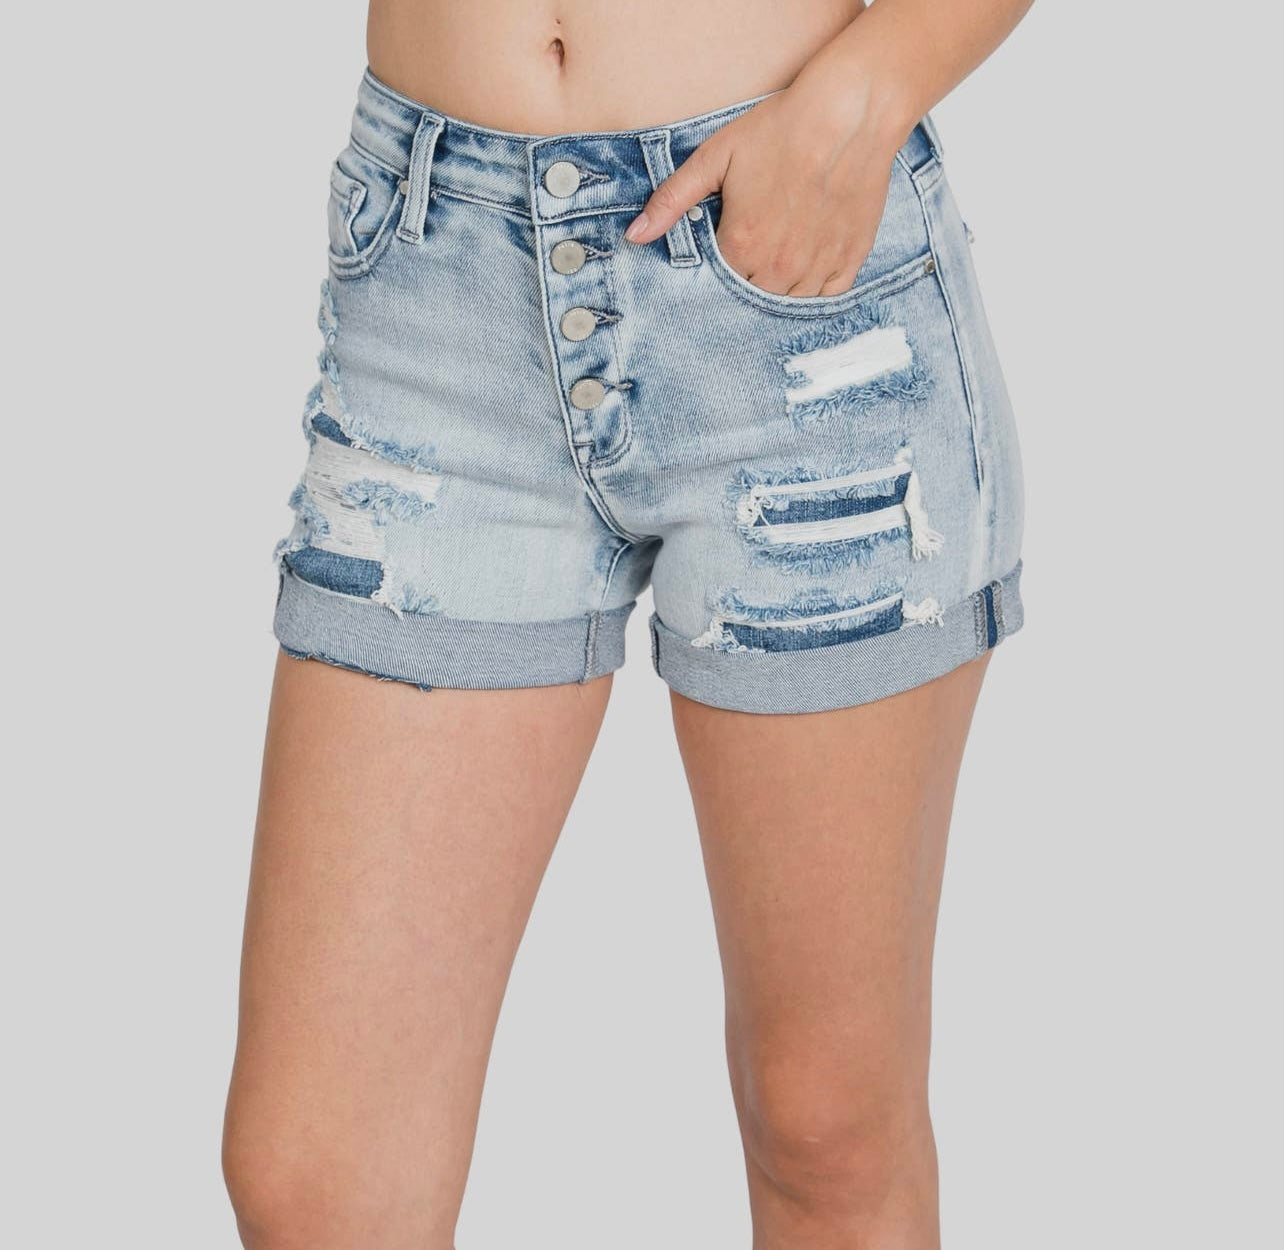 PETRA153 HIGH RISE PATCHED STRETCH SHORTS W/ DOUBLE CUFFED HEM